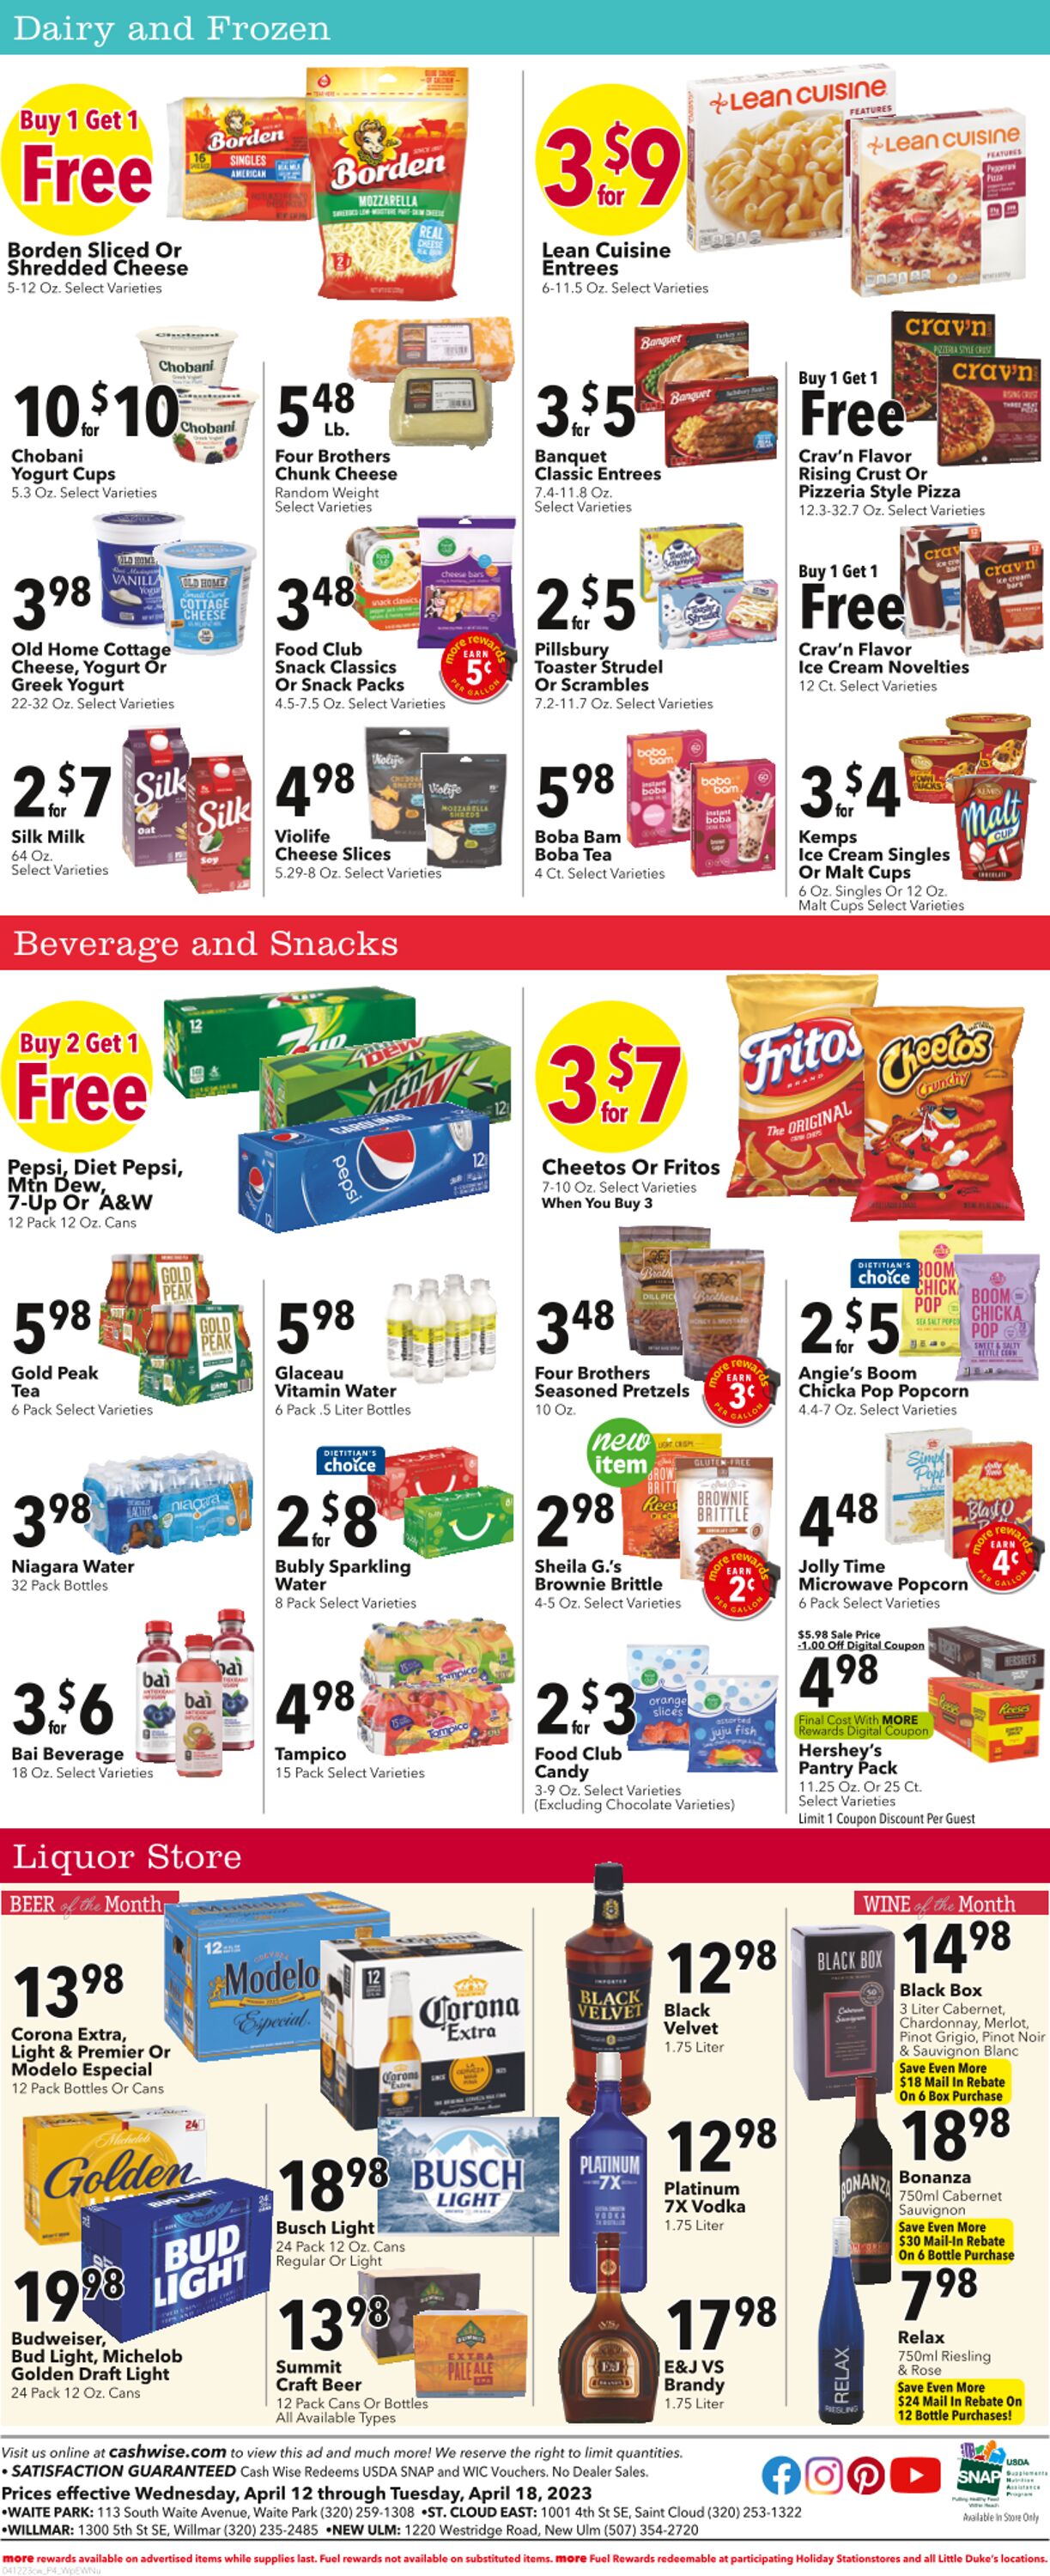 Cash Wise Weekly Ad Circular - valid 04/13-04/19/2023 (Page 4)